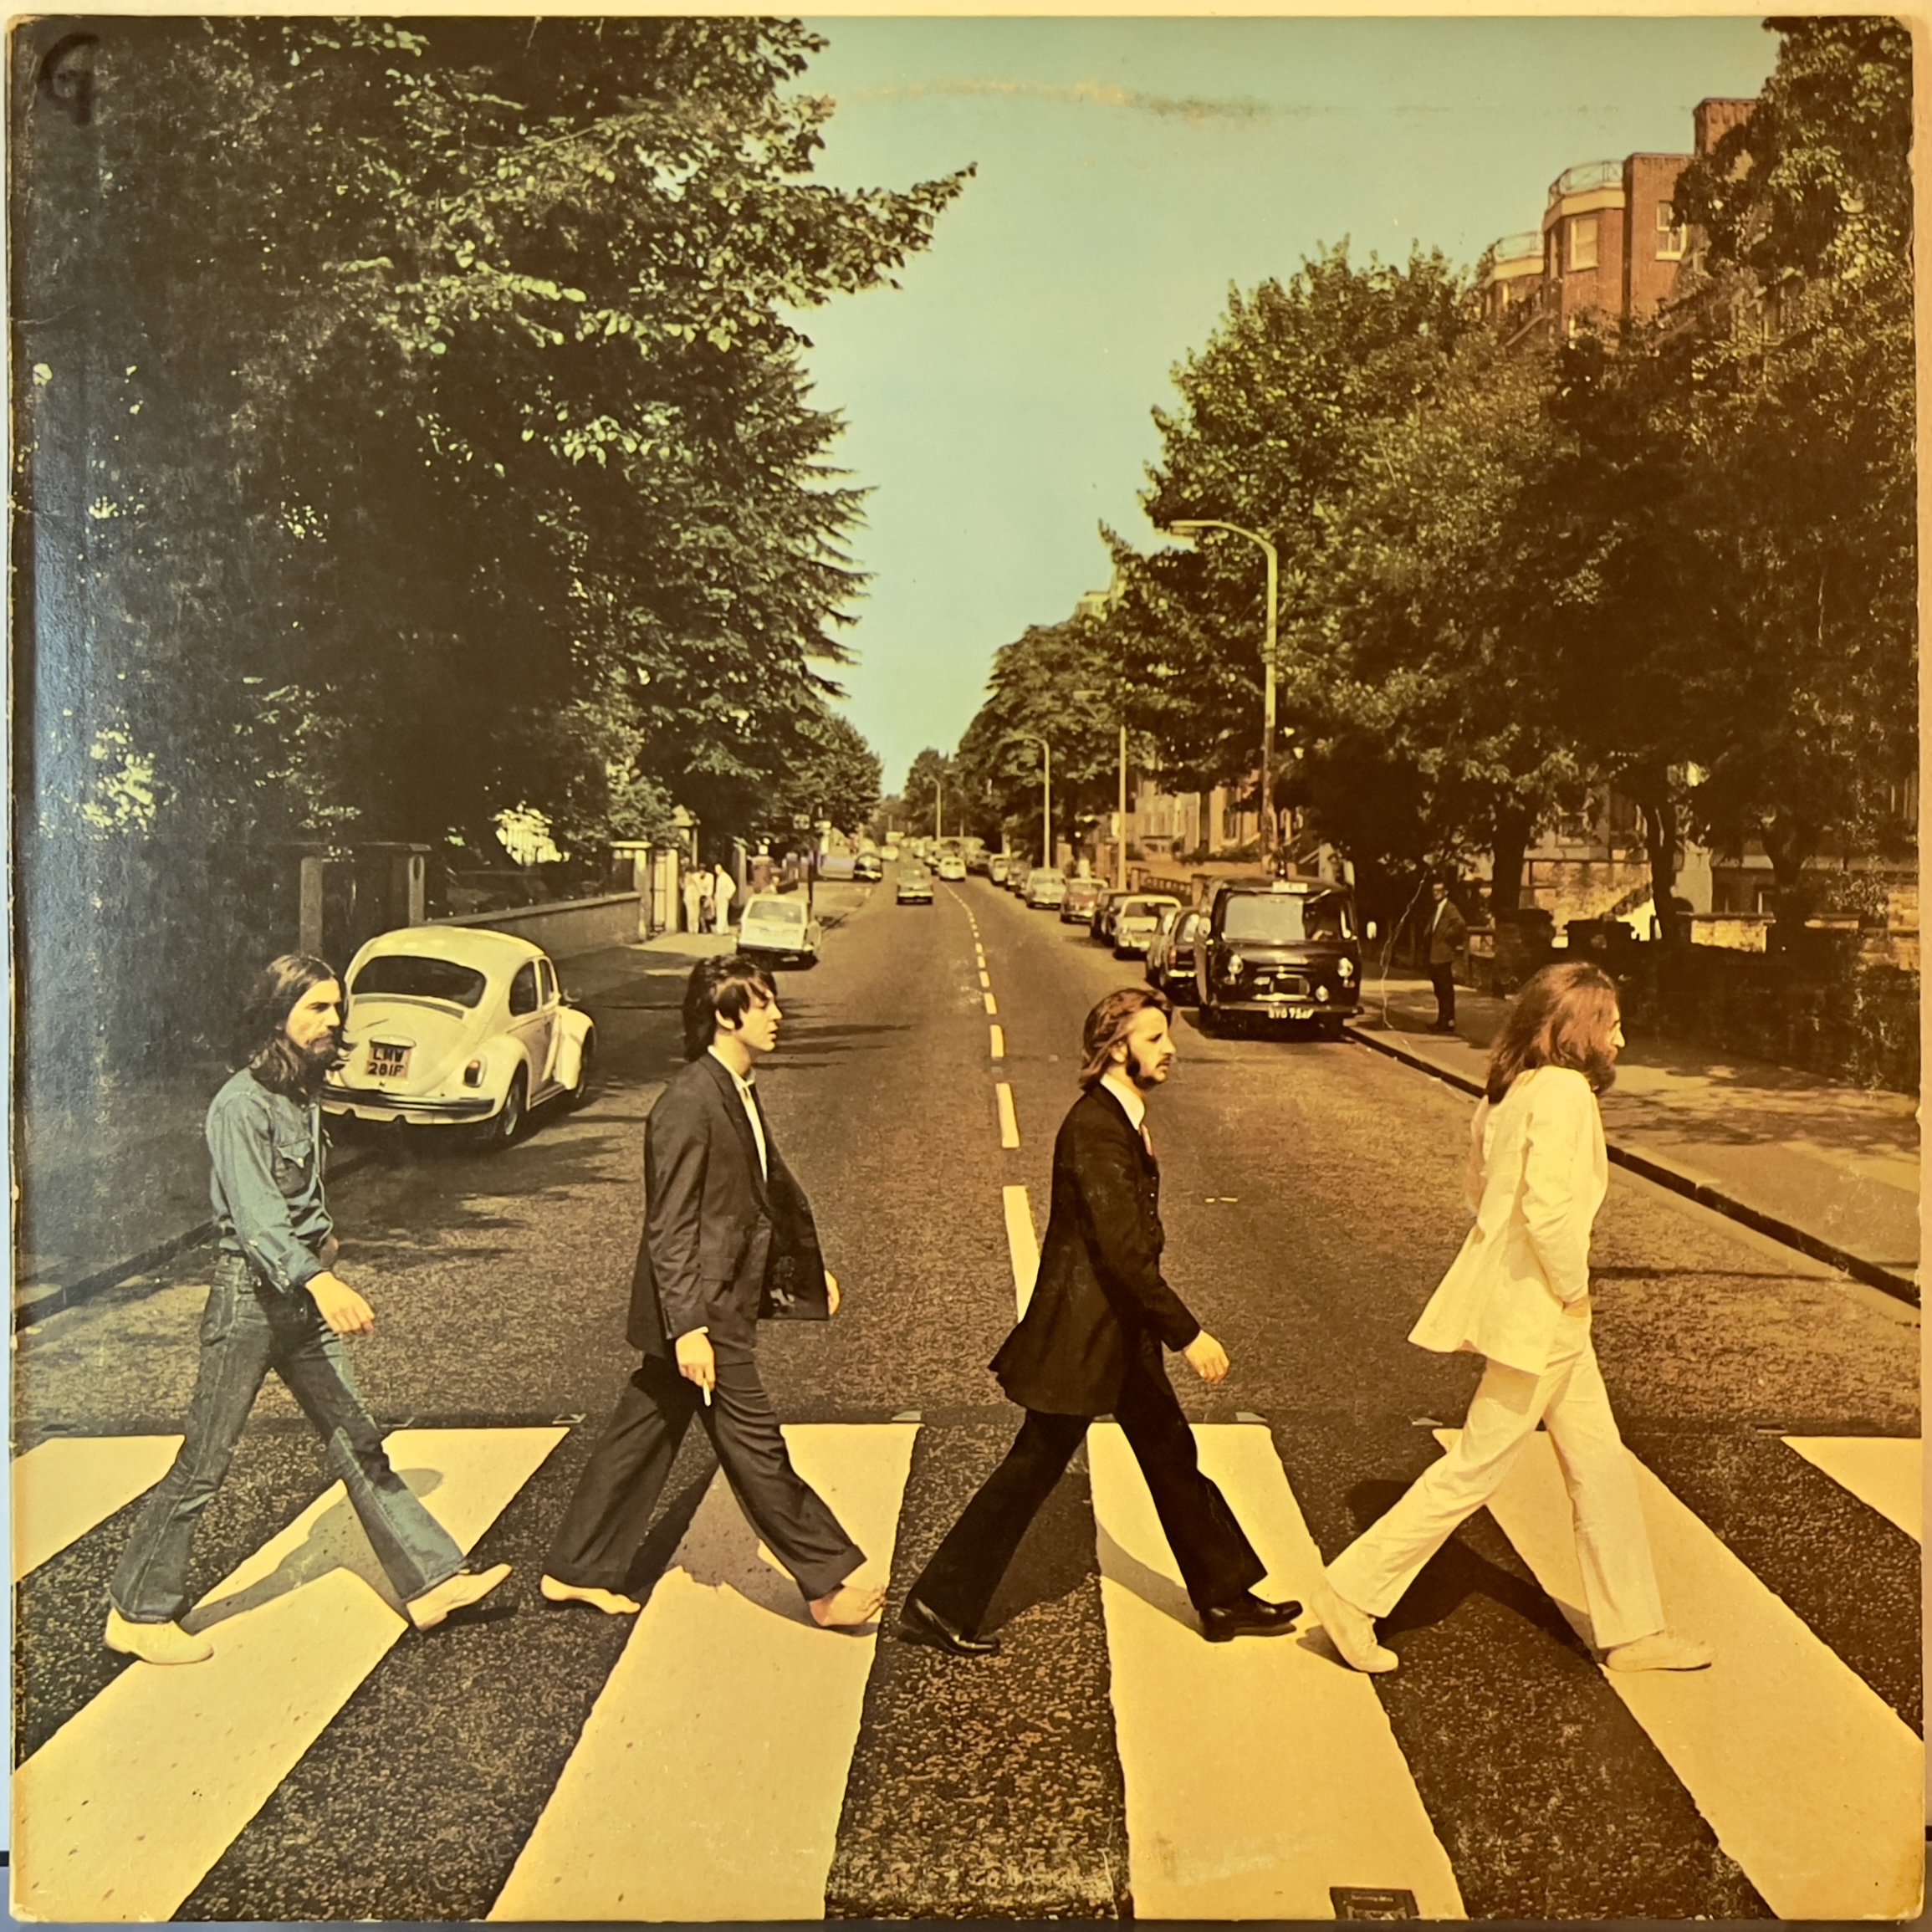 Abbey Road by the Beatles (Vinyl record album review)